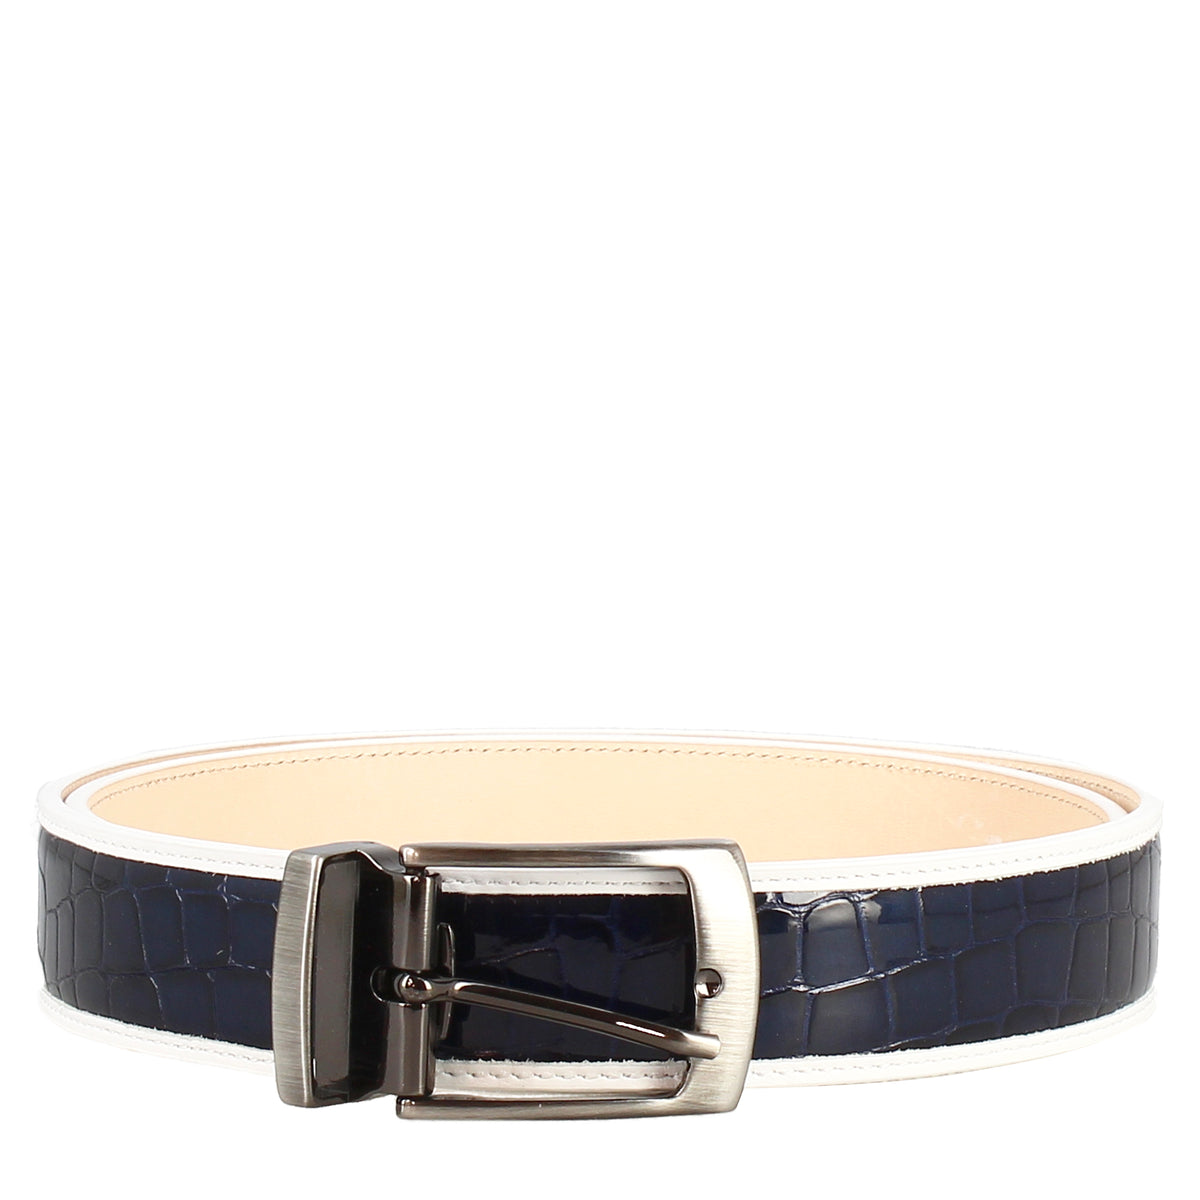 Men's handmade two-tone leather python print belt with metal buckle